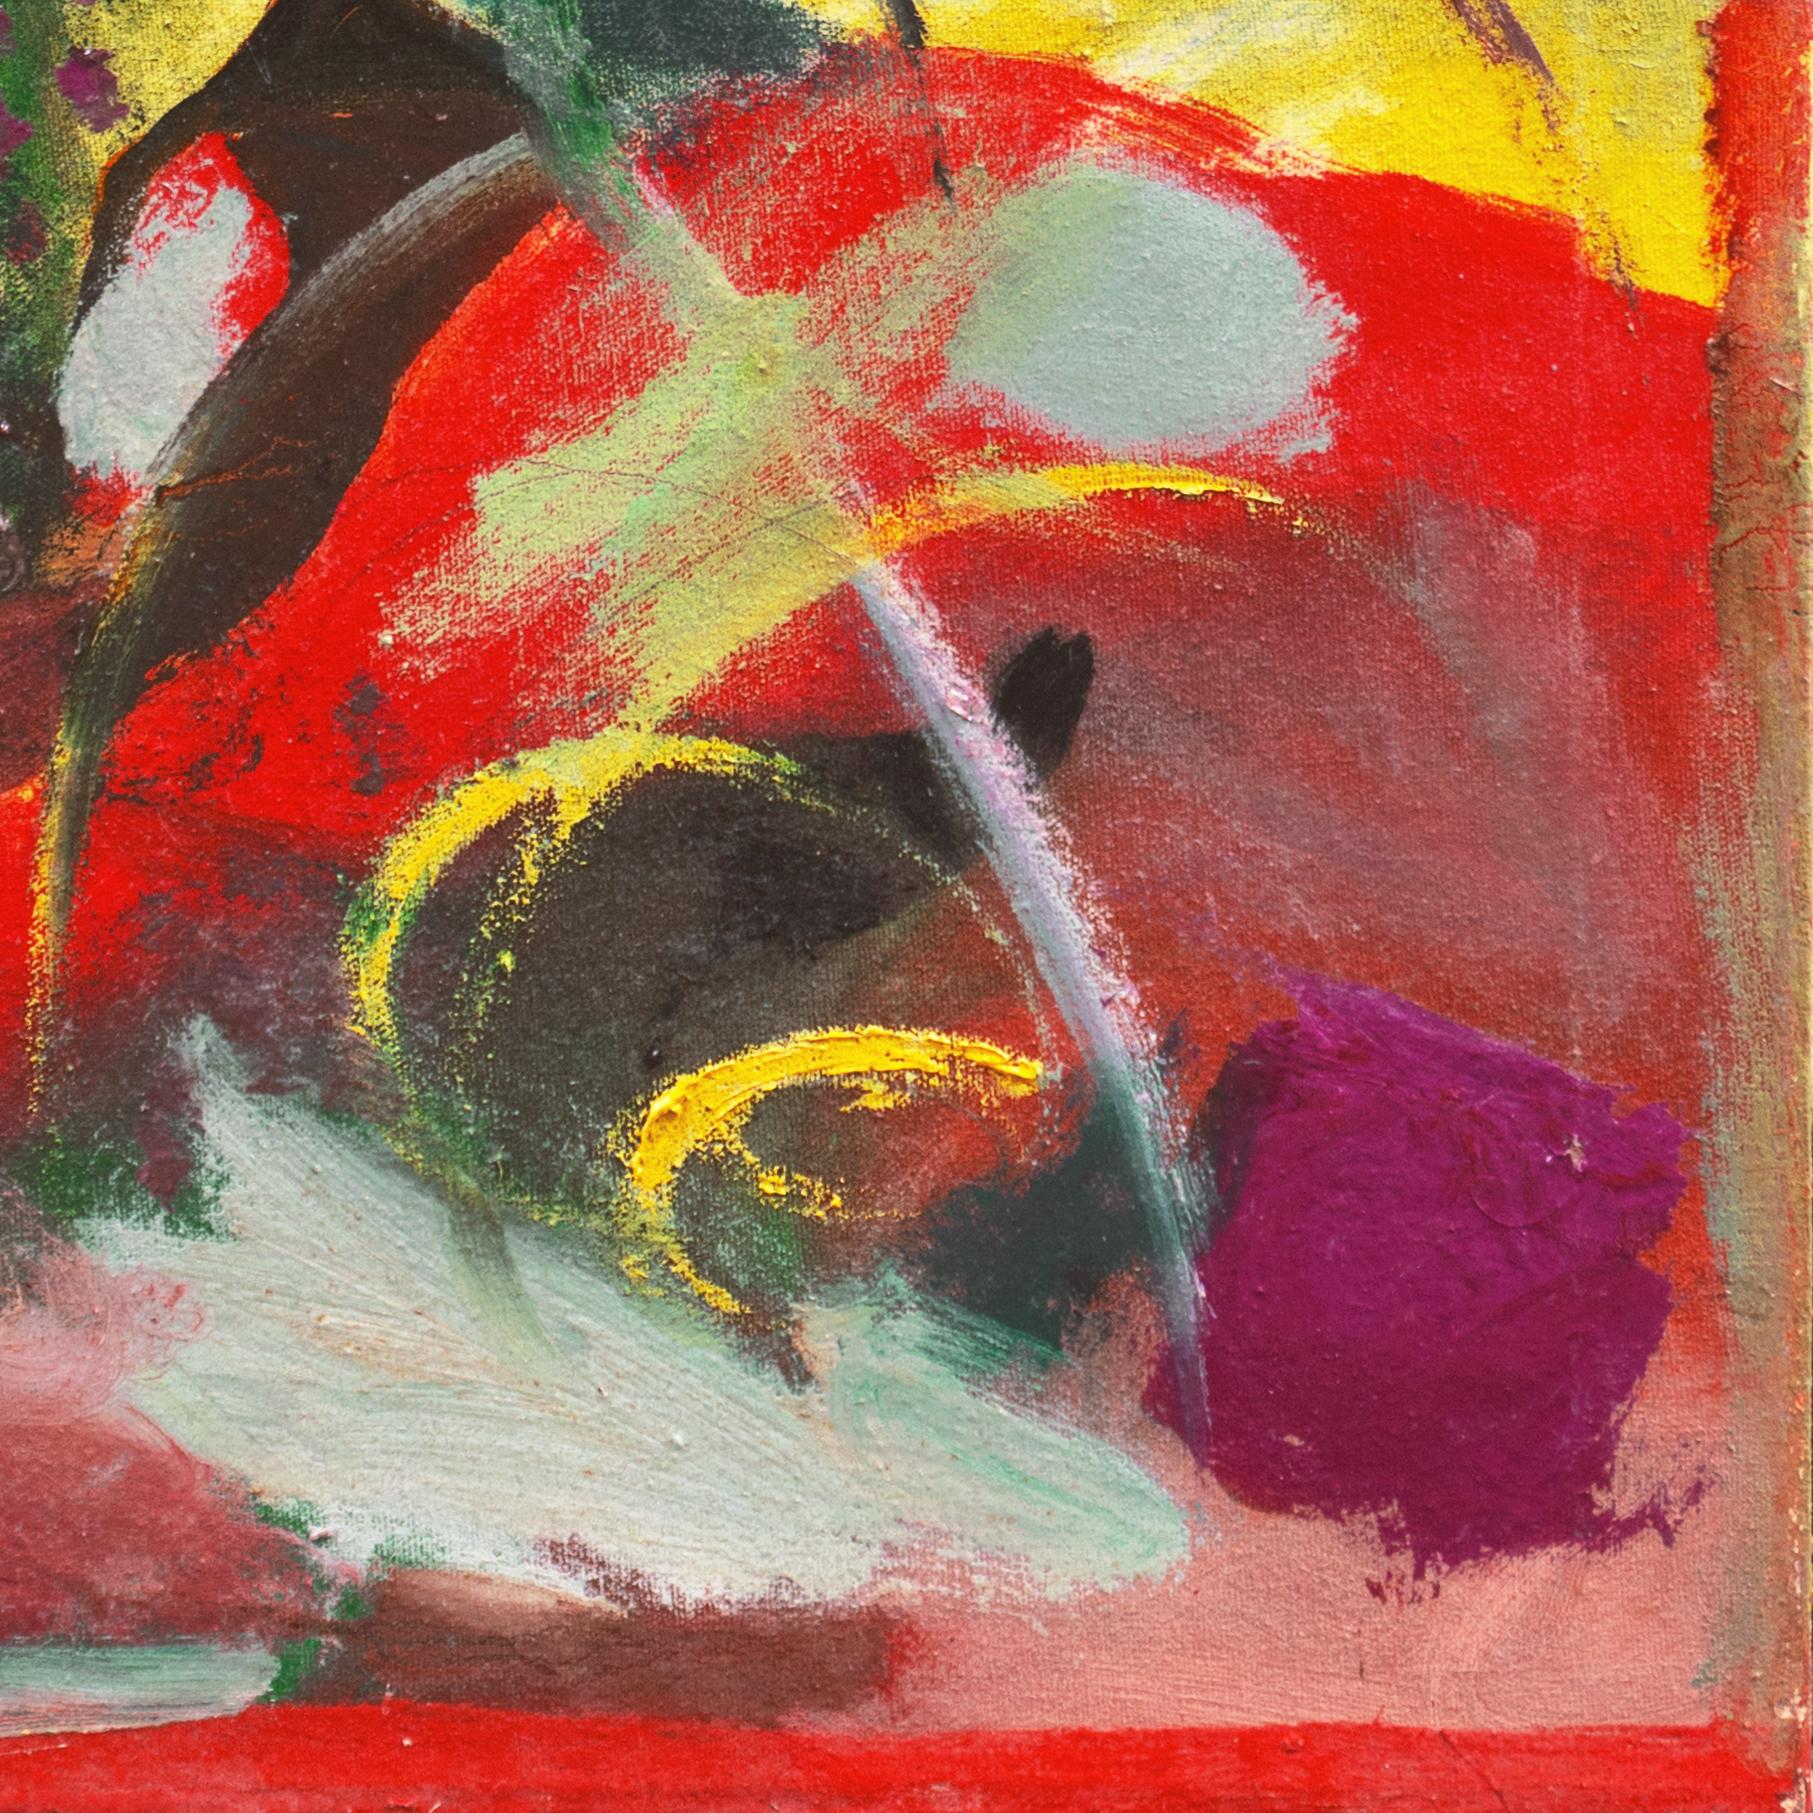 'Abstract, Citron & Scarlet', American Abstraction, Pittsburgh, Freeman Center - Painting by Charles Barr